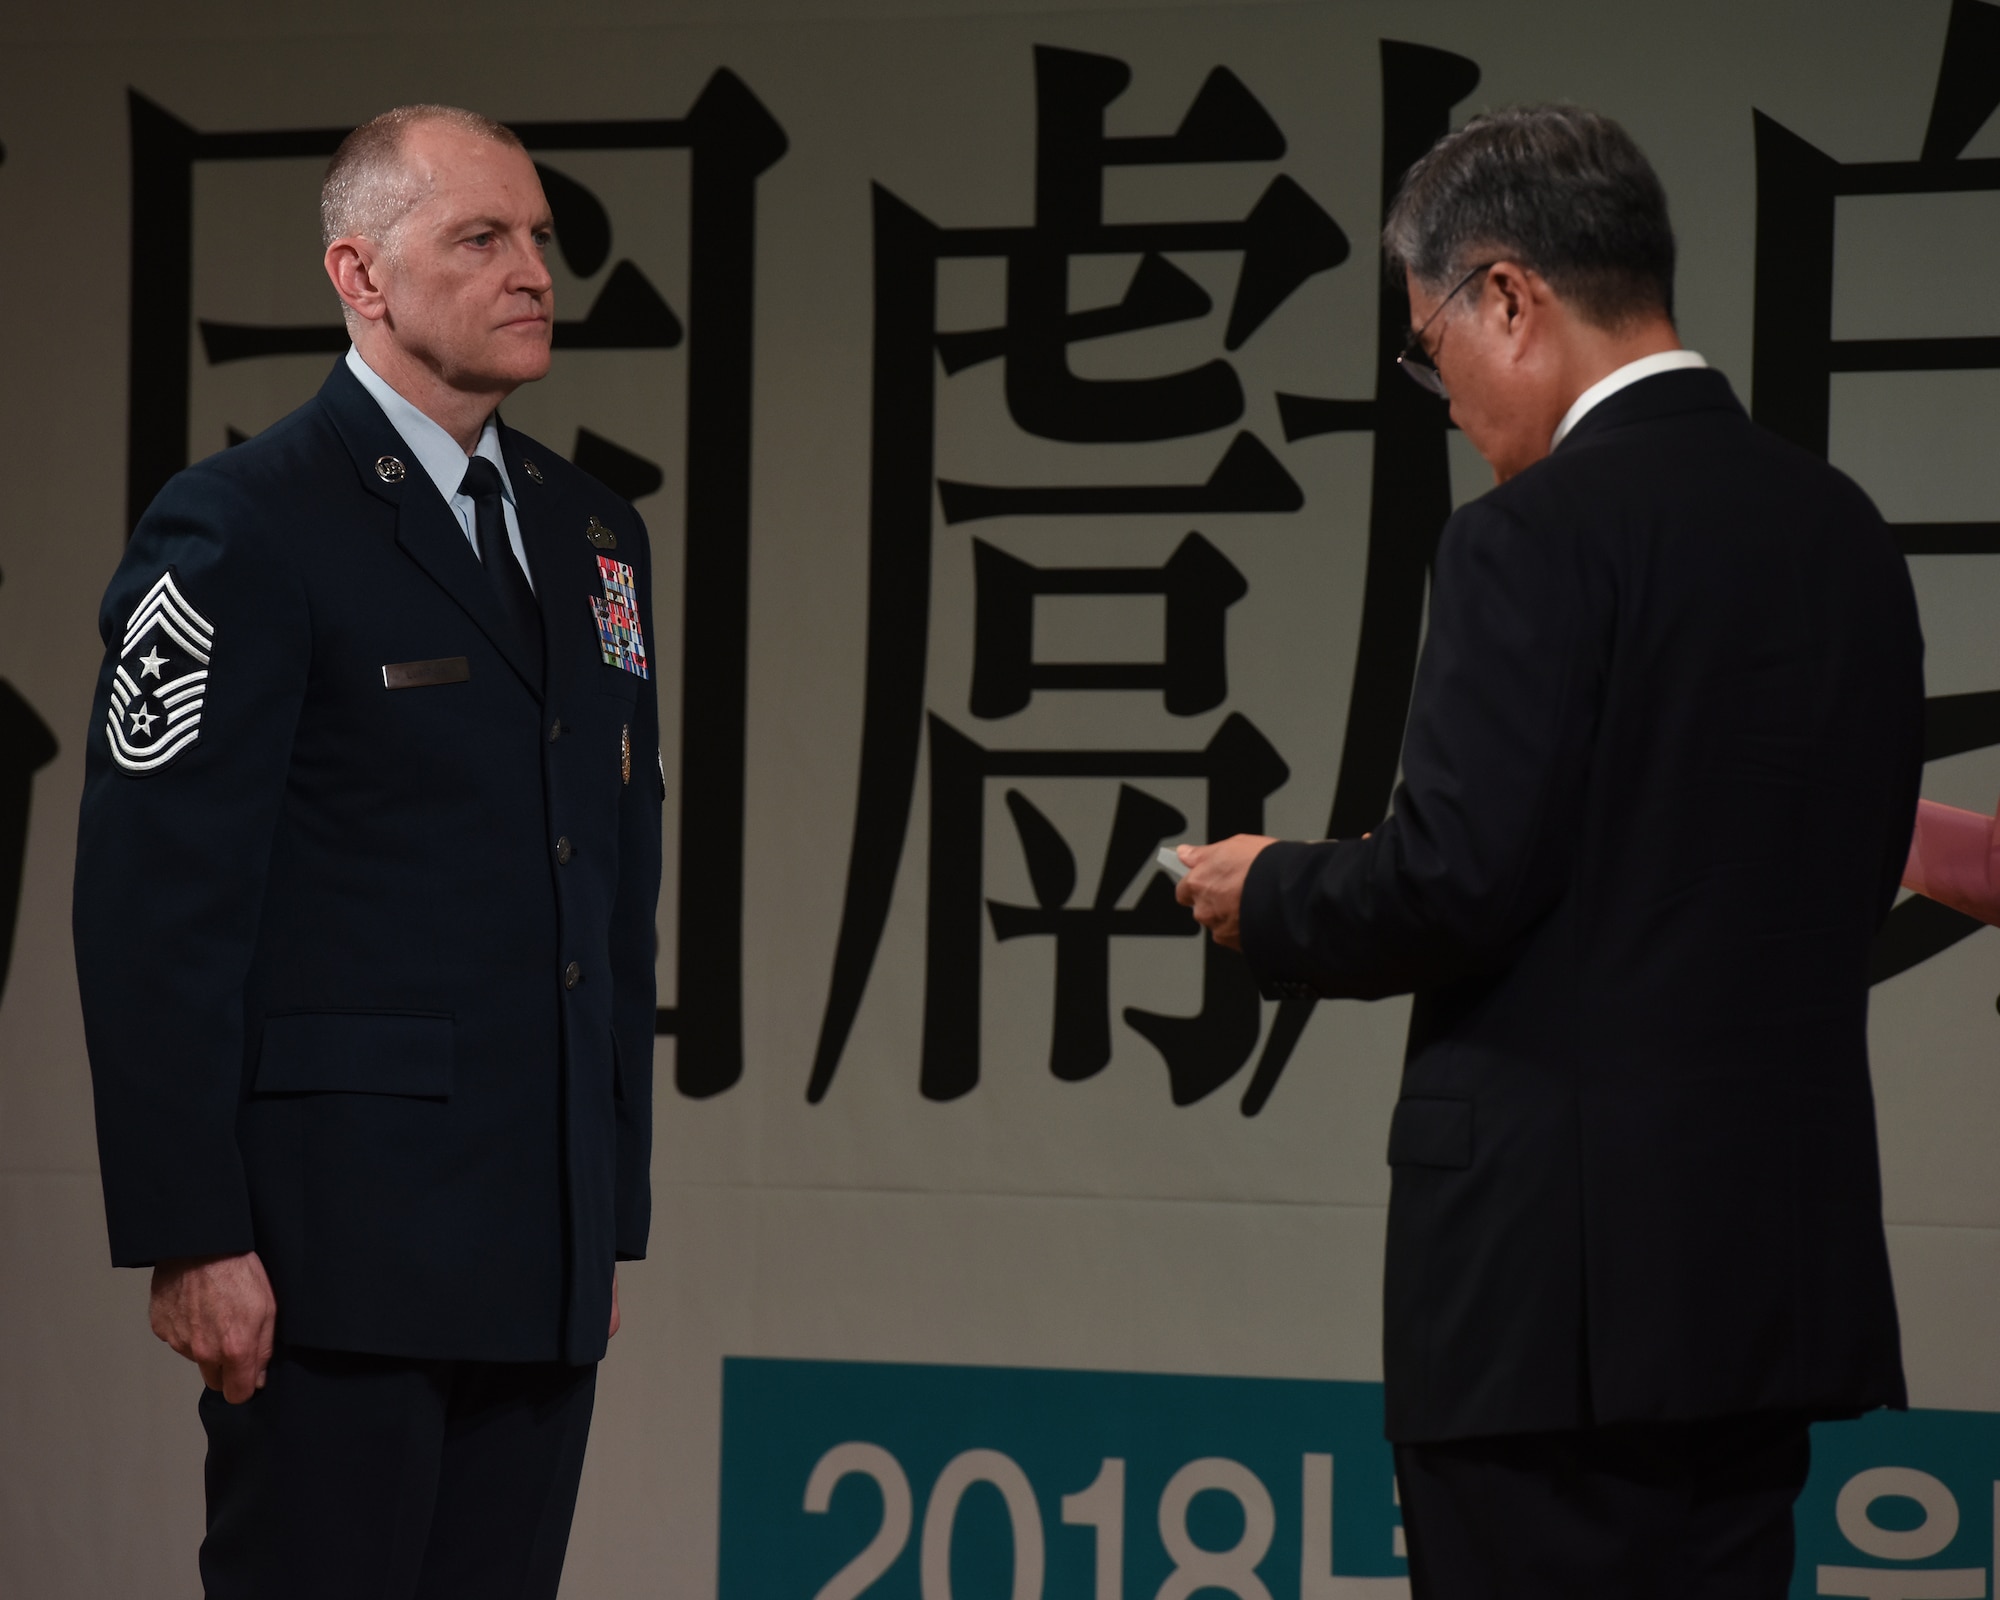 U.S. Air Force Chief Master Sgt. Scott Lumpkin, Seventh Air Force command chief, receives the Republic of Korea – U.S. Alliance Award from Jeong Kyeongdoo, minister of the ROK Ministry of National Defense, in Seoul, ROK, Nov. 14, 2018. Lumpkin is the first enlisted U.S. Air Force member to receive the award for military service and his dedication to strengthening the ROK and U.S. alliance. (U.S. Air Force photo by Staff Sgt. Sergio A. Gamboa)